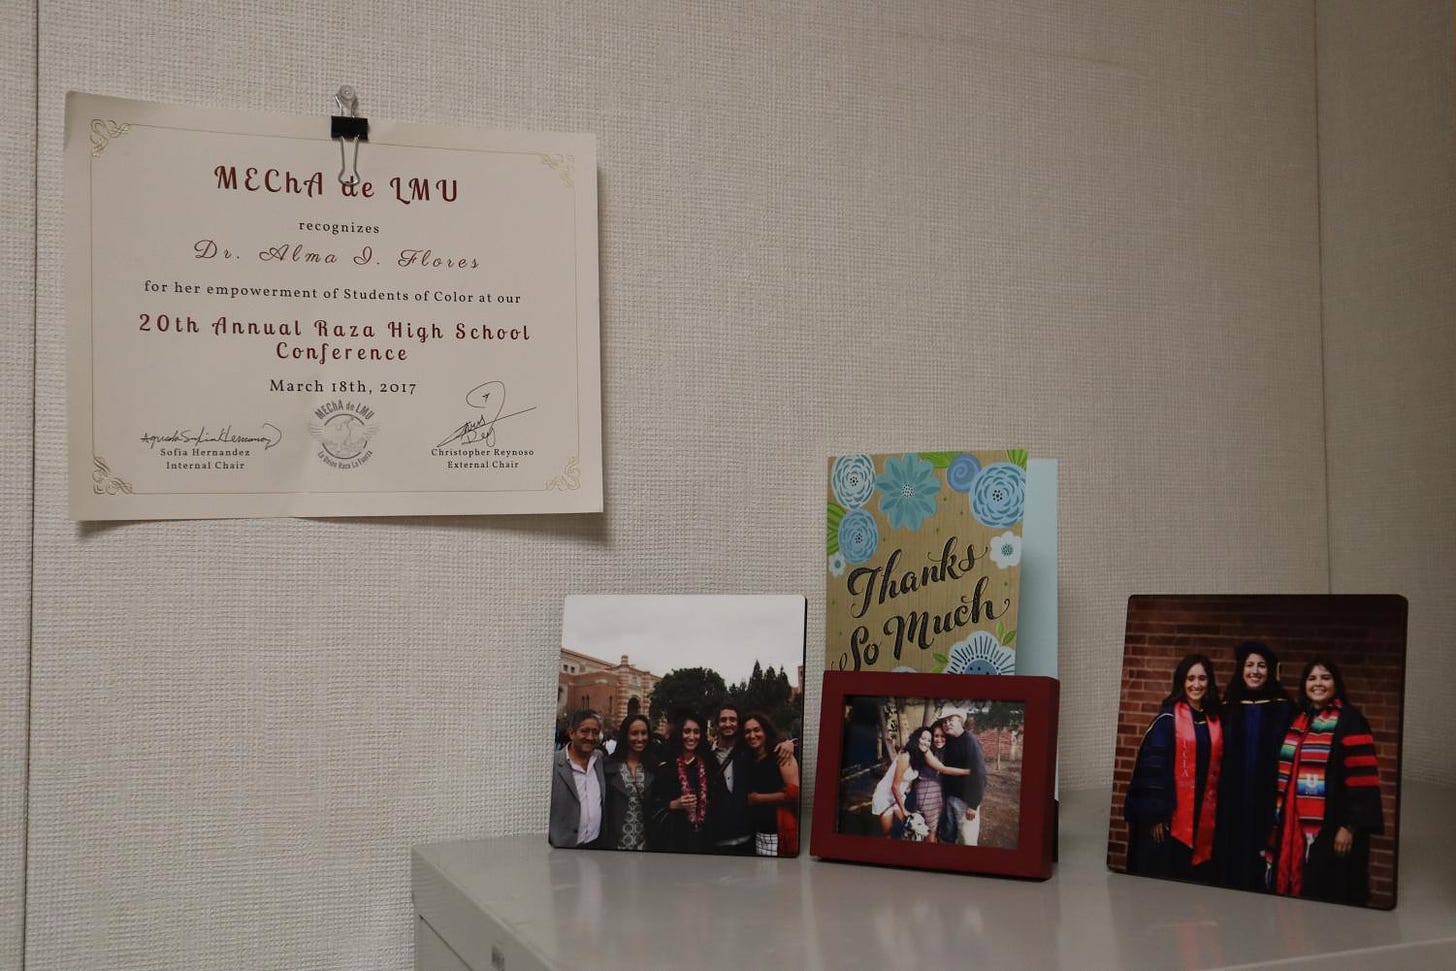 Sacramento State’s education assistant professor Alma Flores hangs an award from Loyola Marymount University’s Movimiento Estudiantil Chicanx de Aztlán that recognizes her for her empowerment of students of color. Flores said that not only does Sac State need to hire more faculty of color, but the retention of that faculty is just as important.